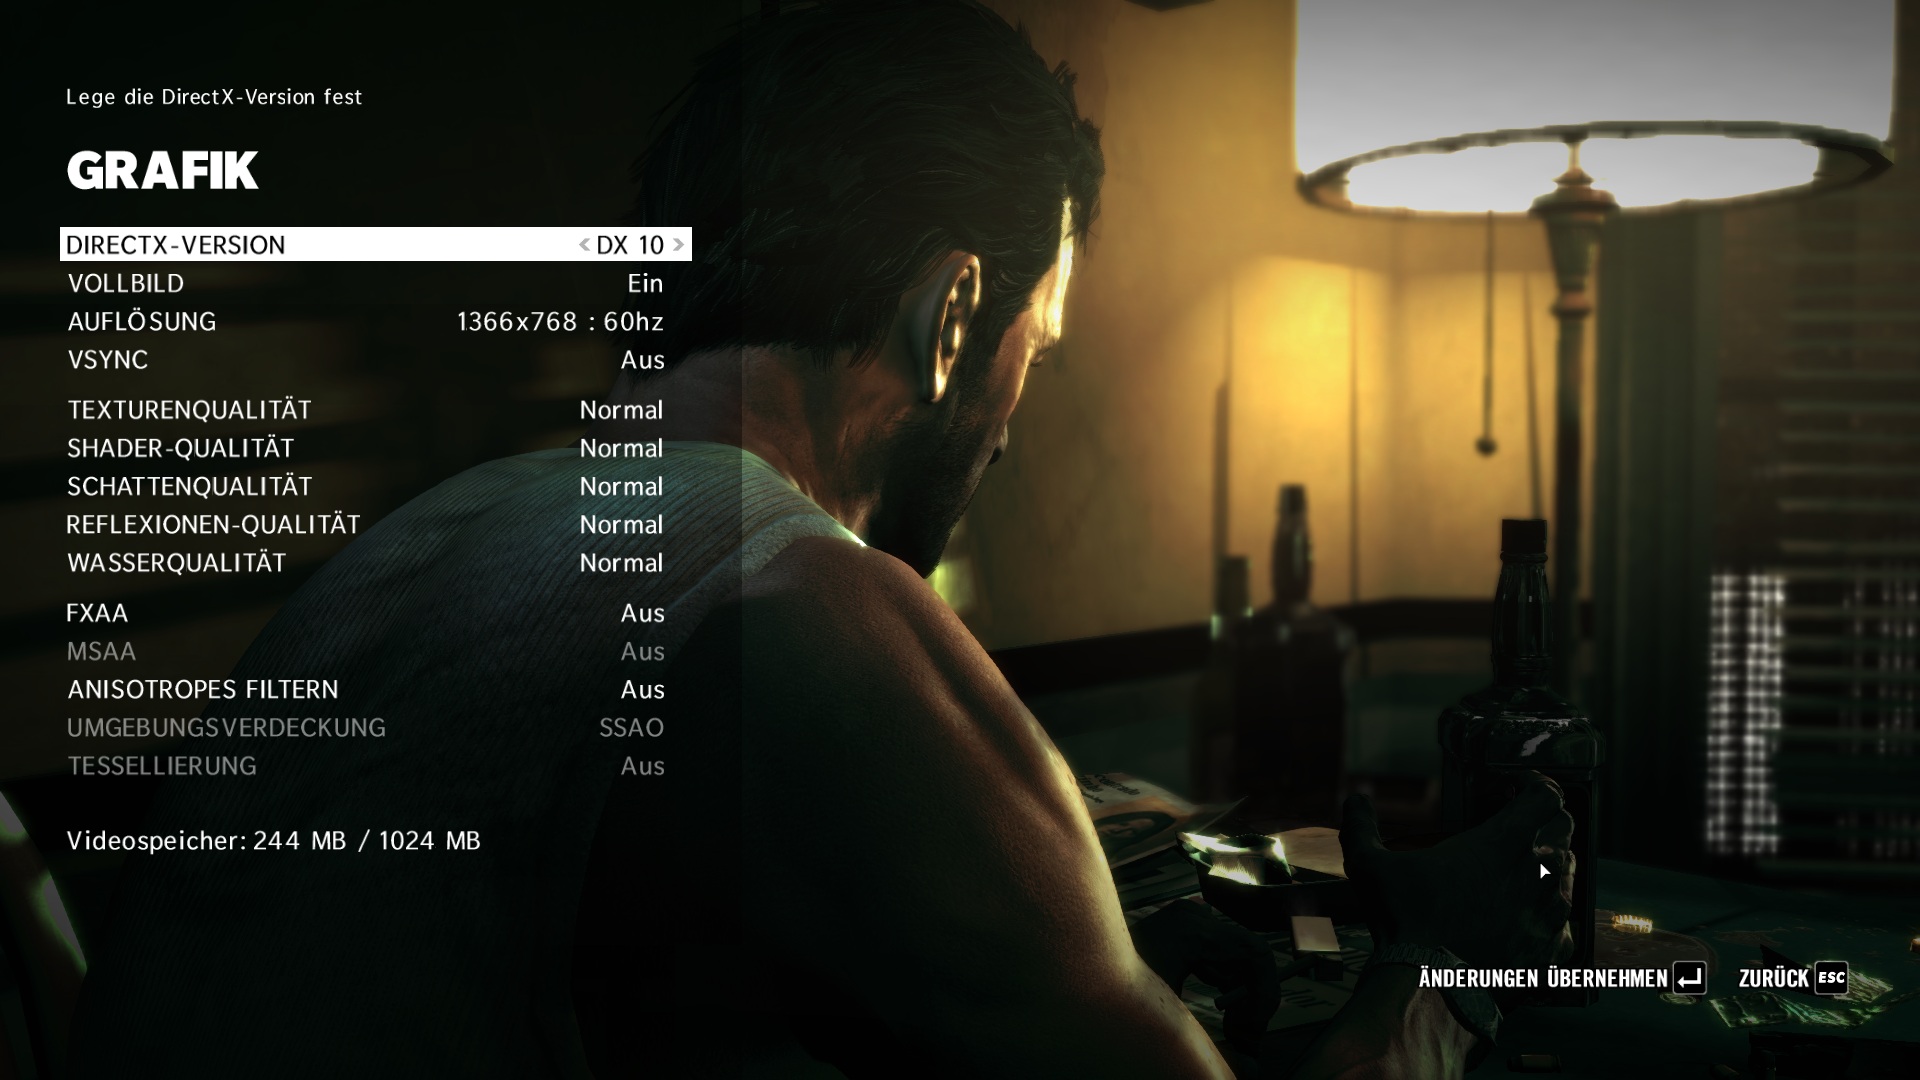 Max Payne 3 system requirements